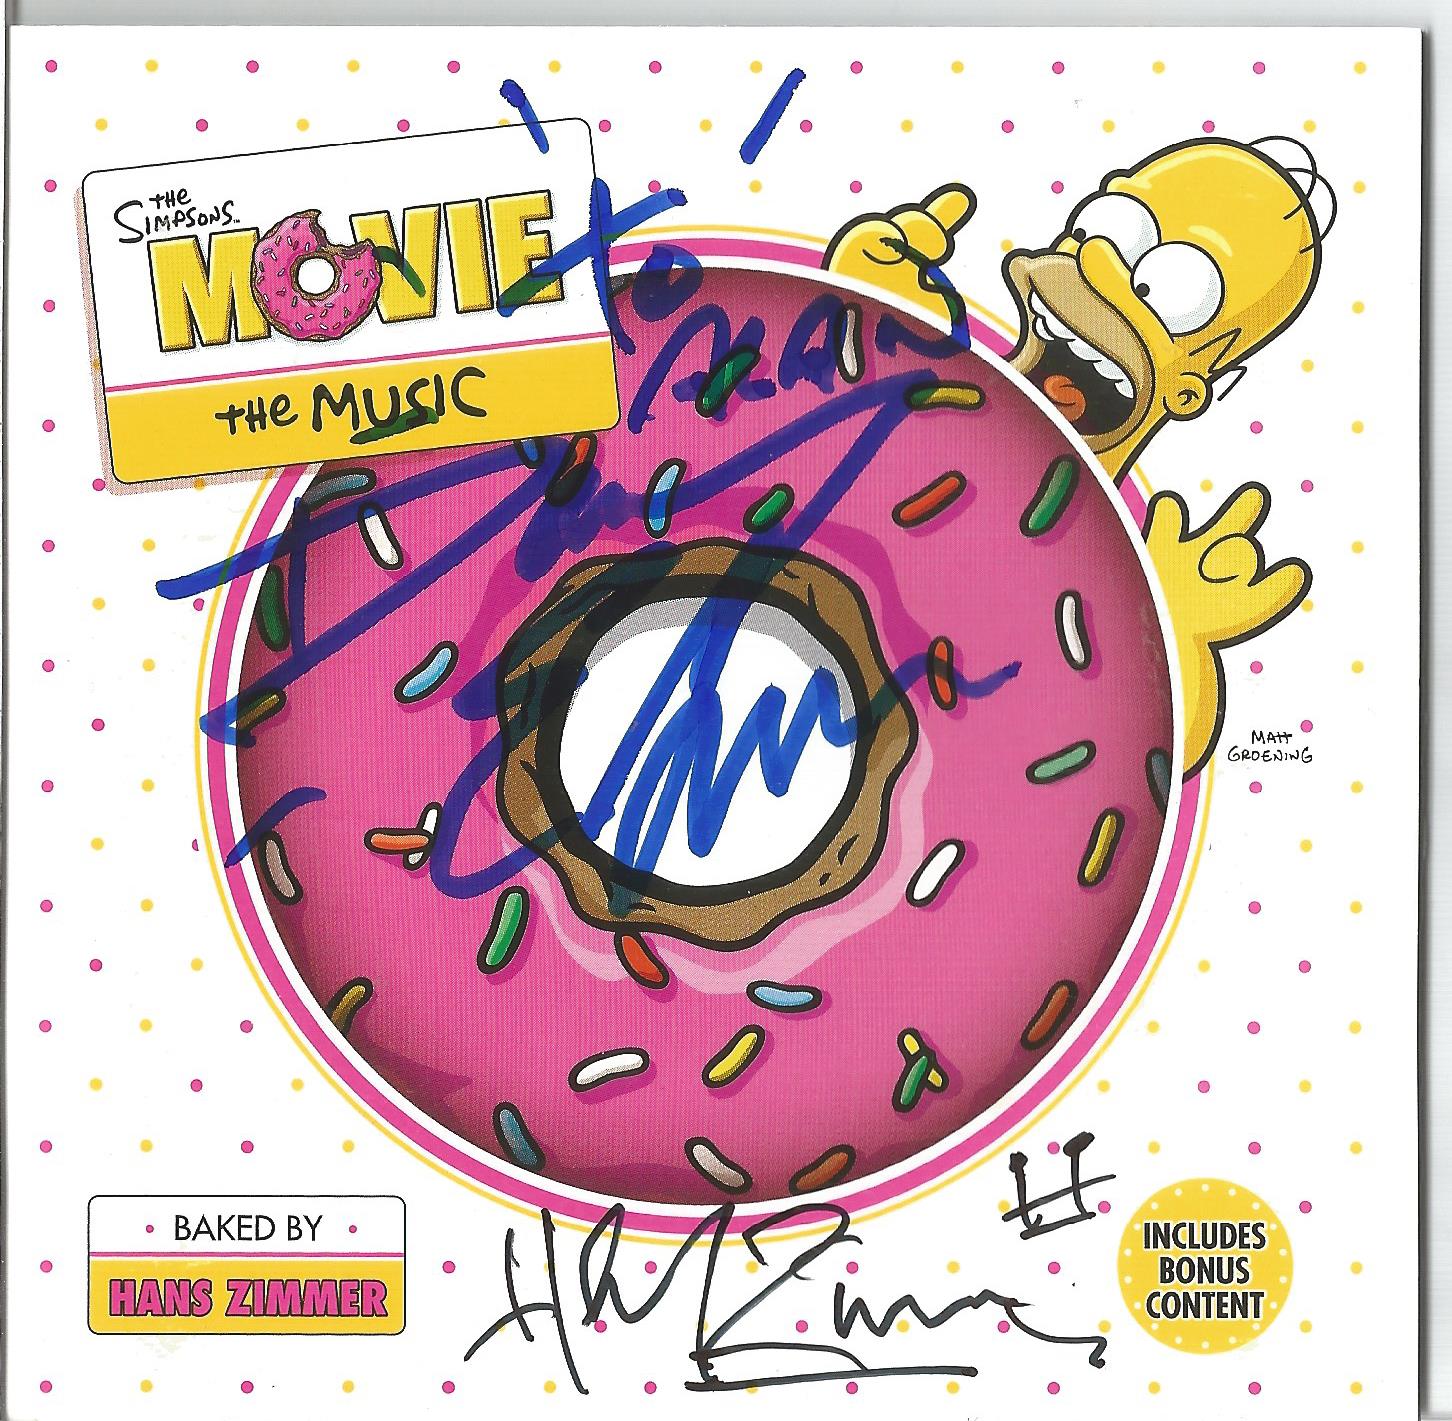 The Simpsons Movie The Music CD signed on the box by Matt Groening and on the inside sleeve by David - Image 2 of 2